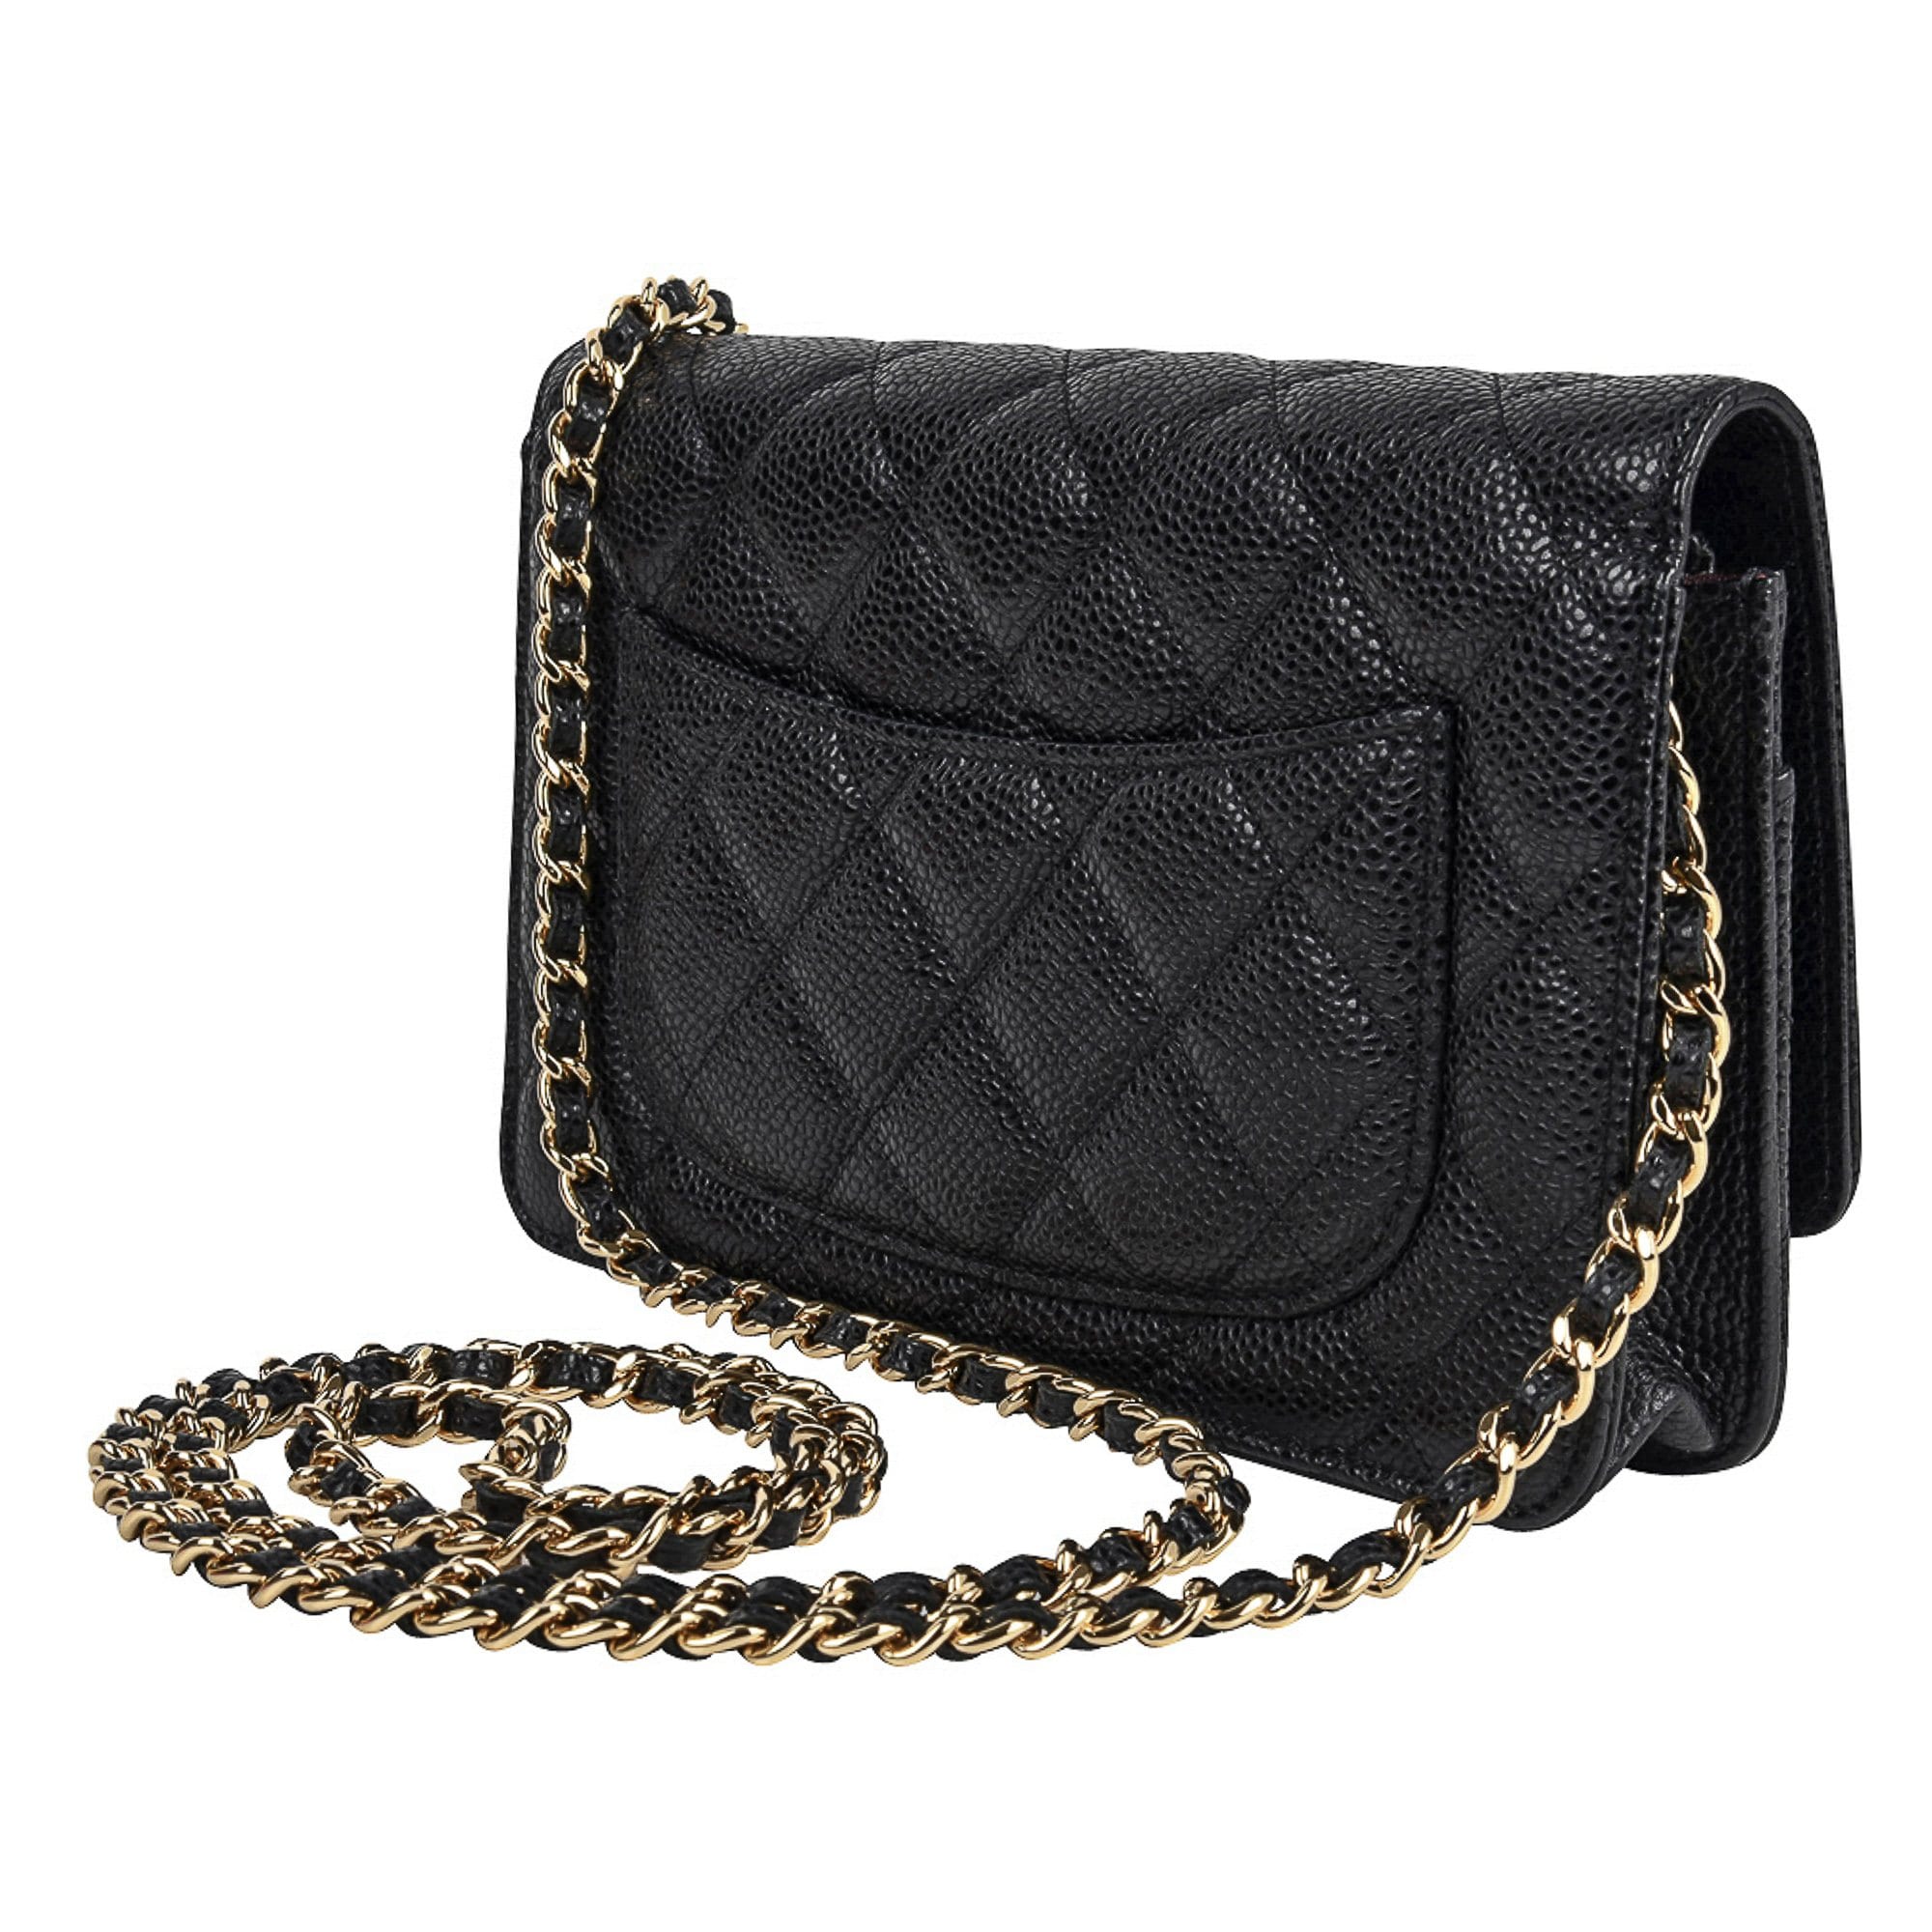 Wallet on Chain leather mini bag